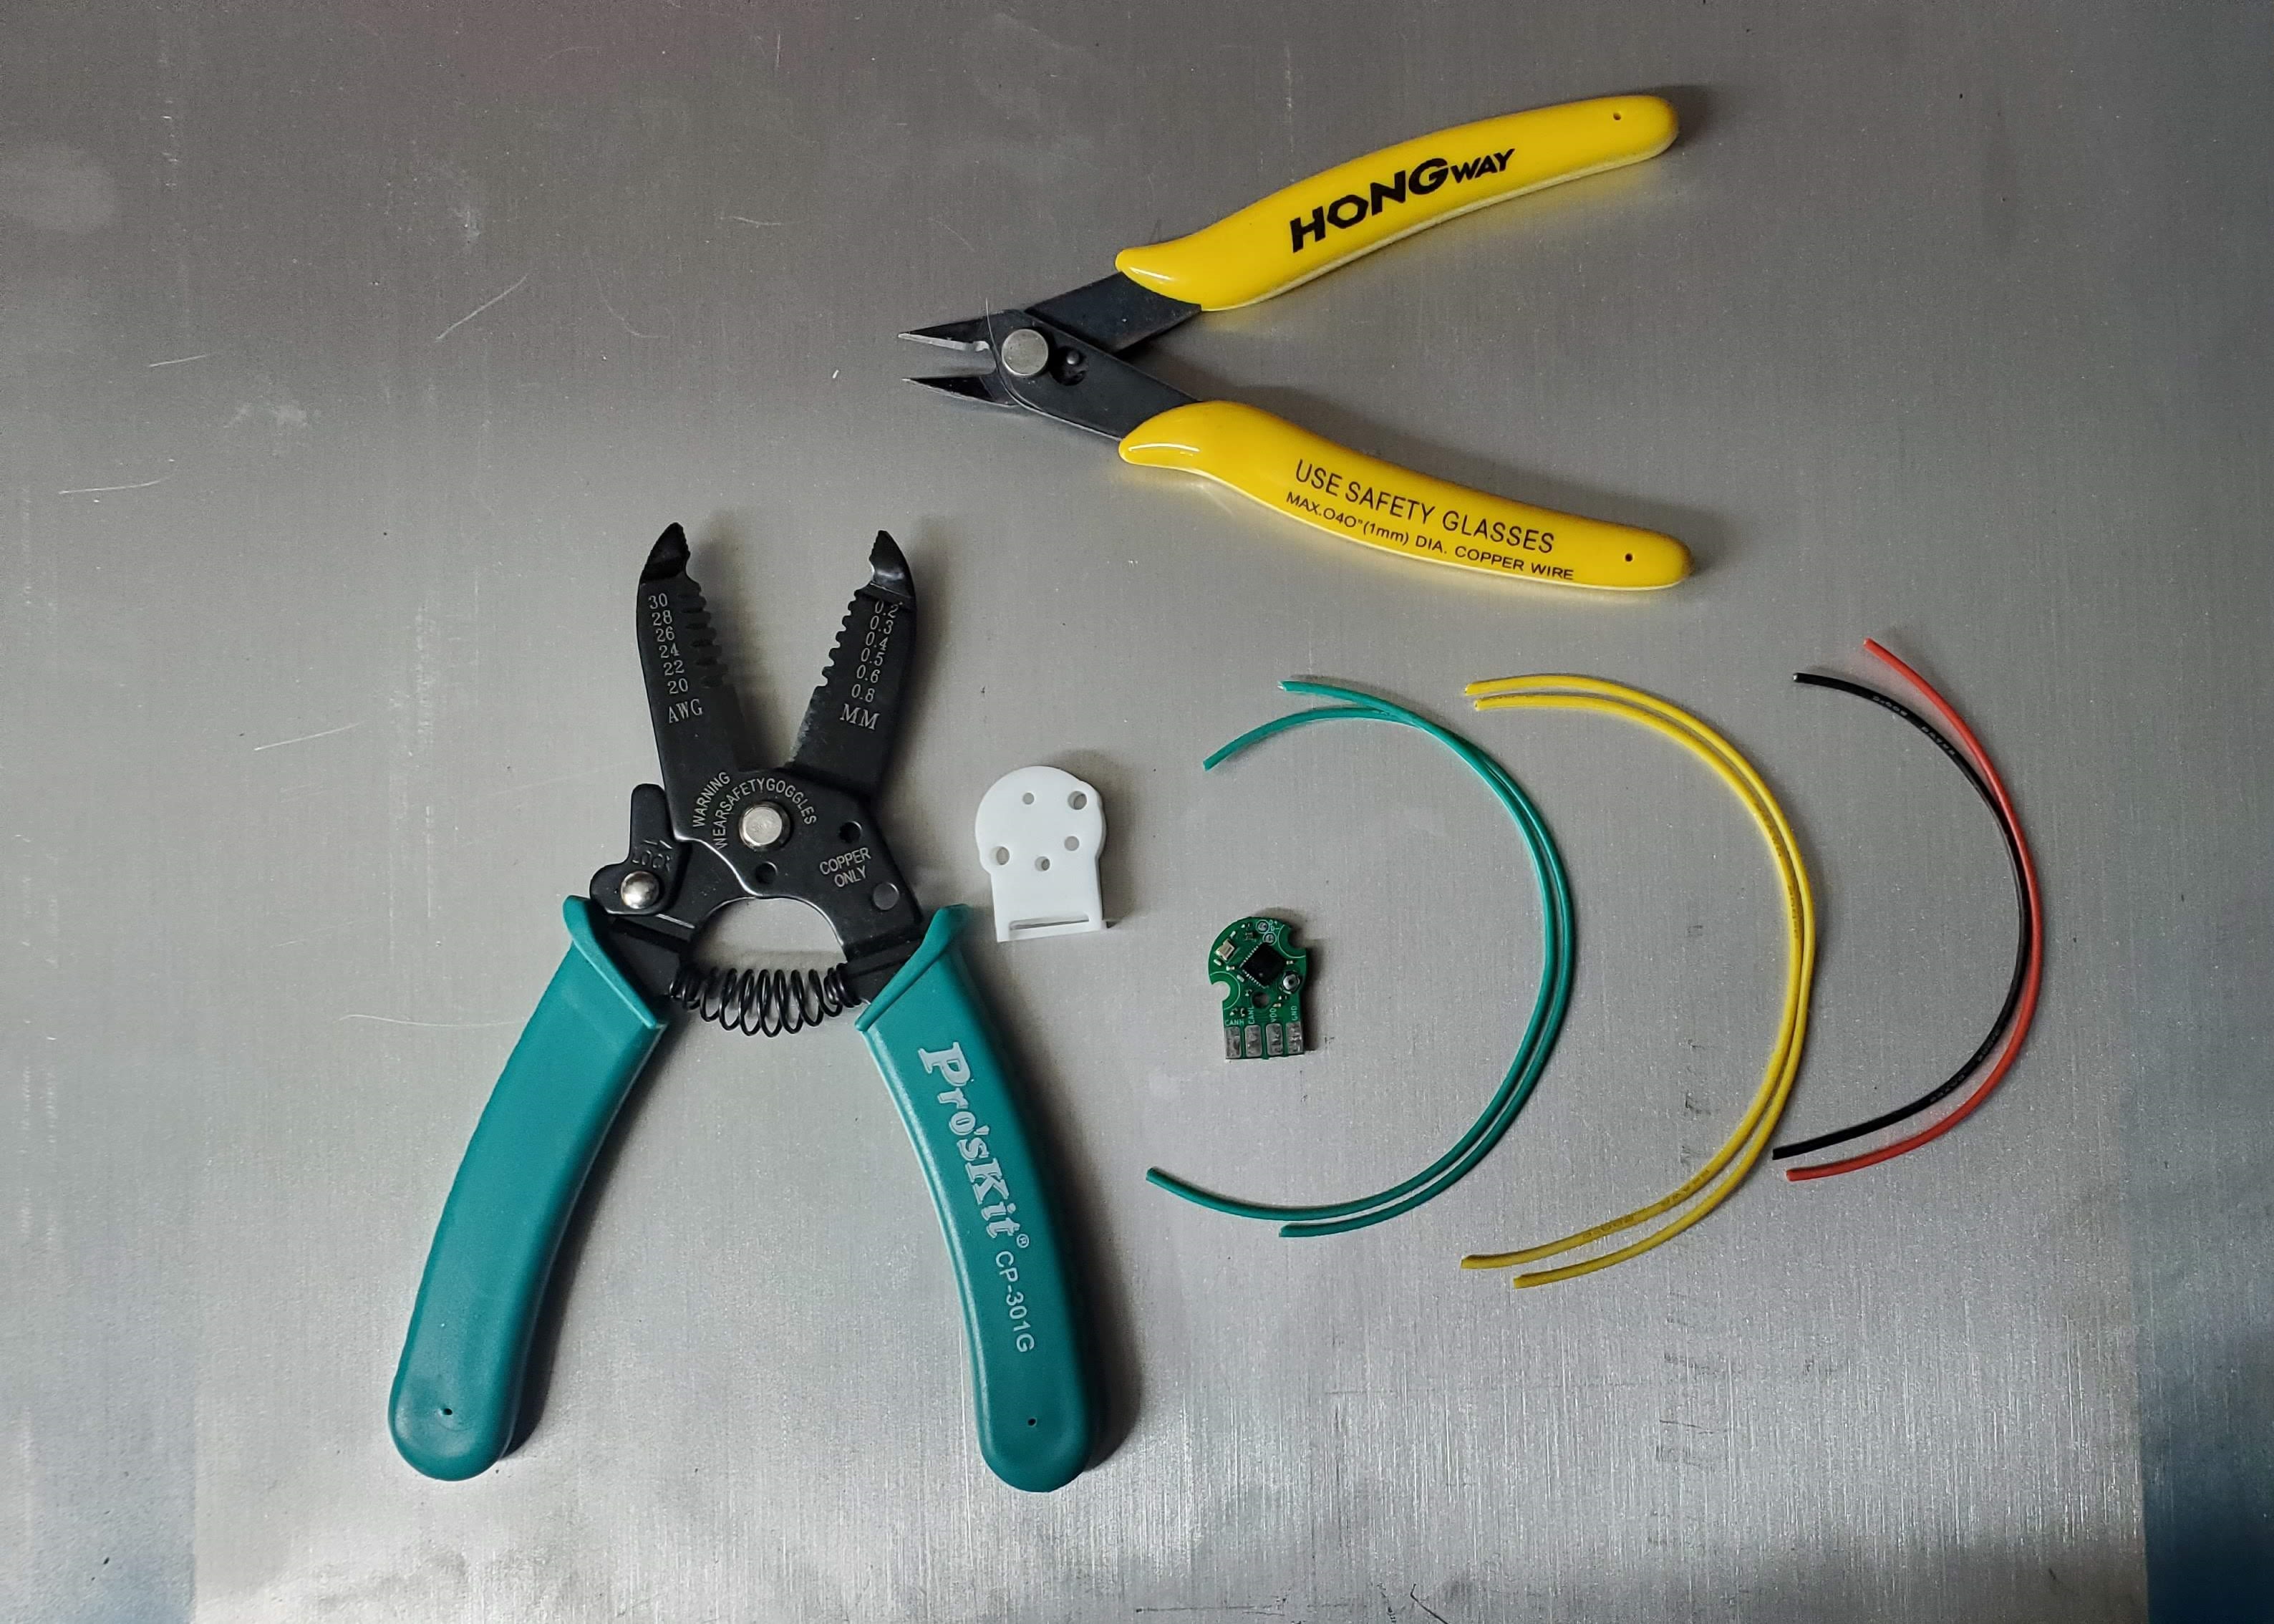 Wires, Canandcoder, wire stripper, and flush cutters